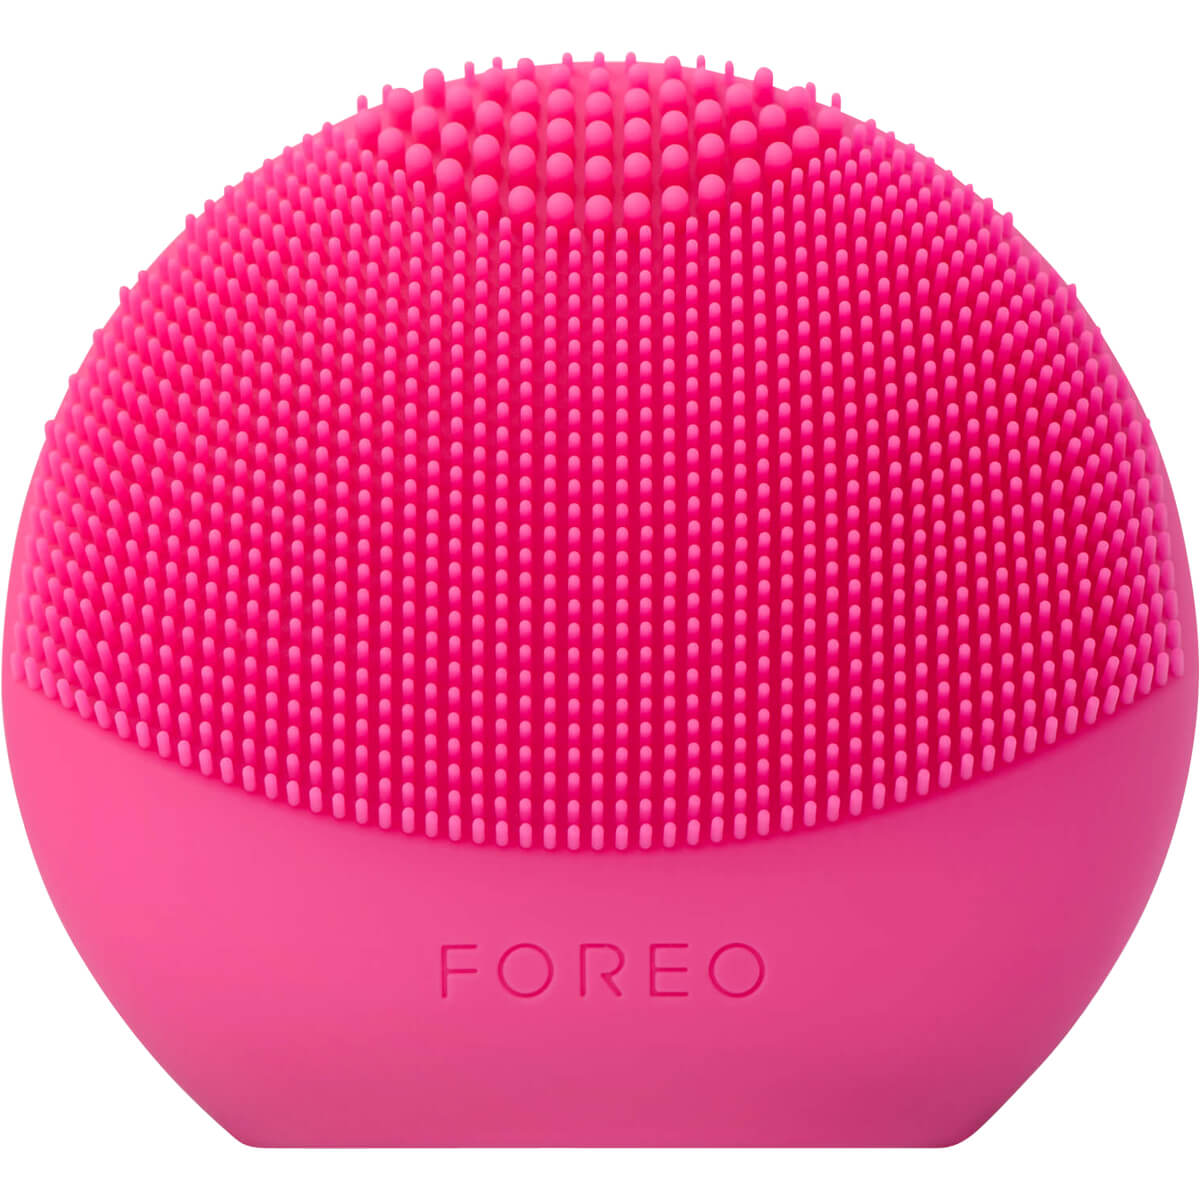 US Removal IPL CurrentBody Advanced | 2 FOREO Hair Device PEACH